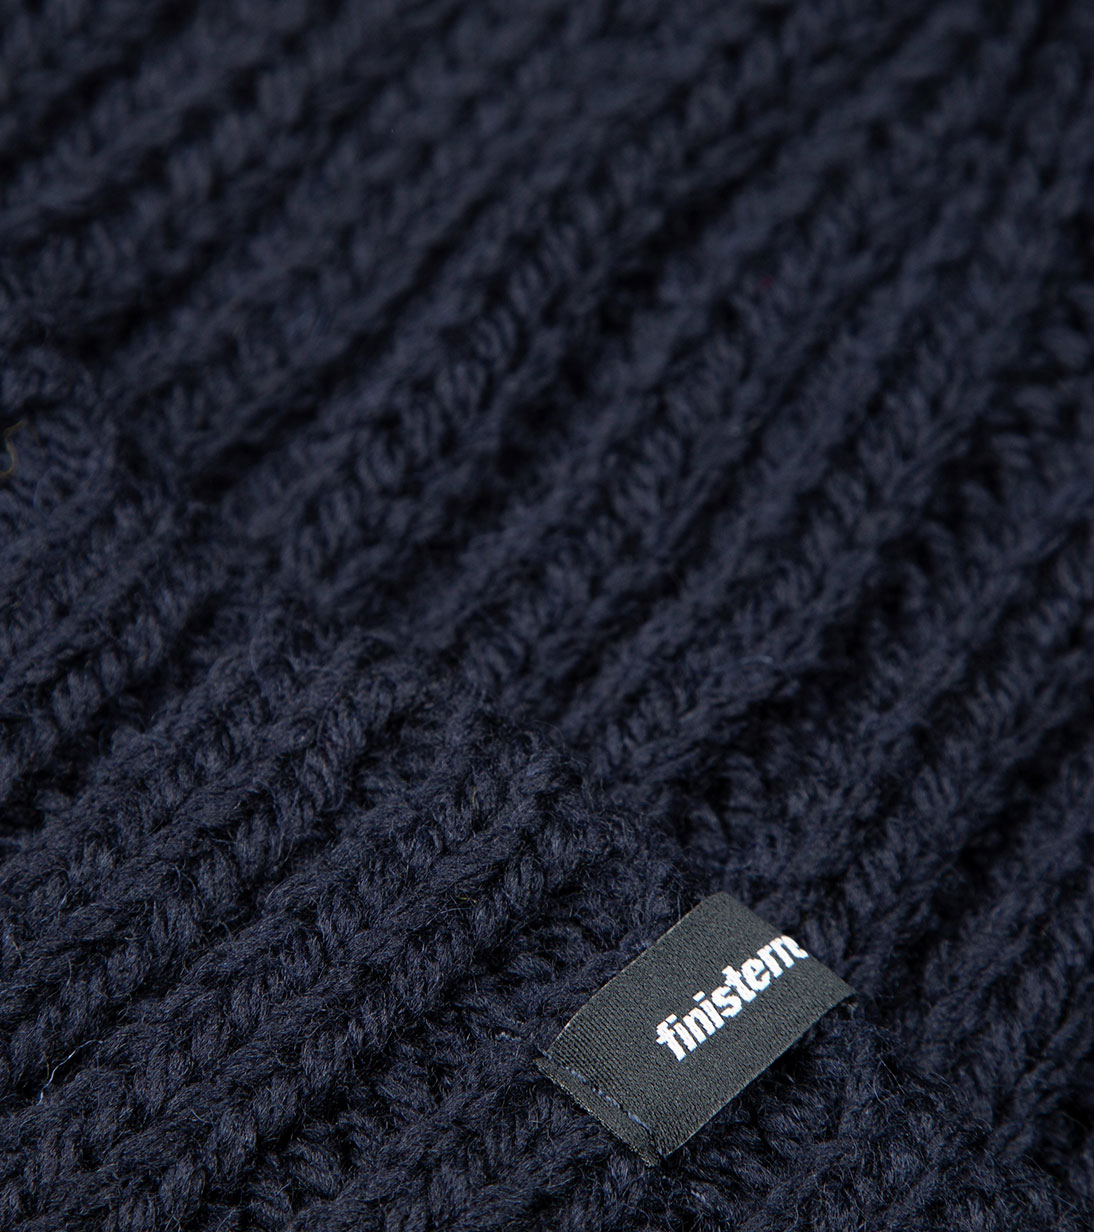 Made from: Warm wool blend